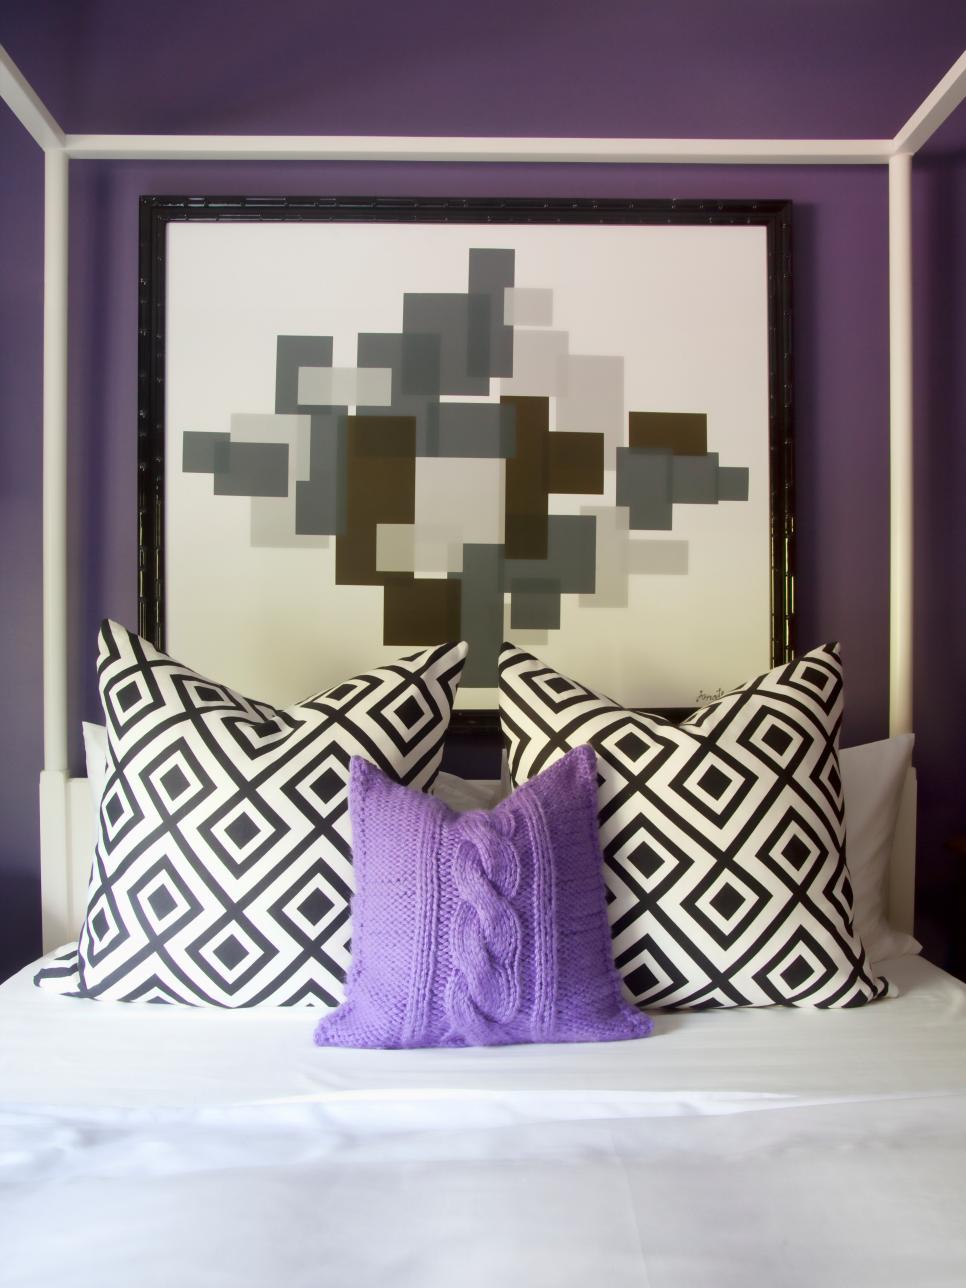 Purple Bedroom With Black & White Graphic Pillows and Artwork